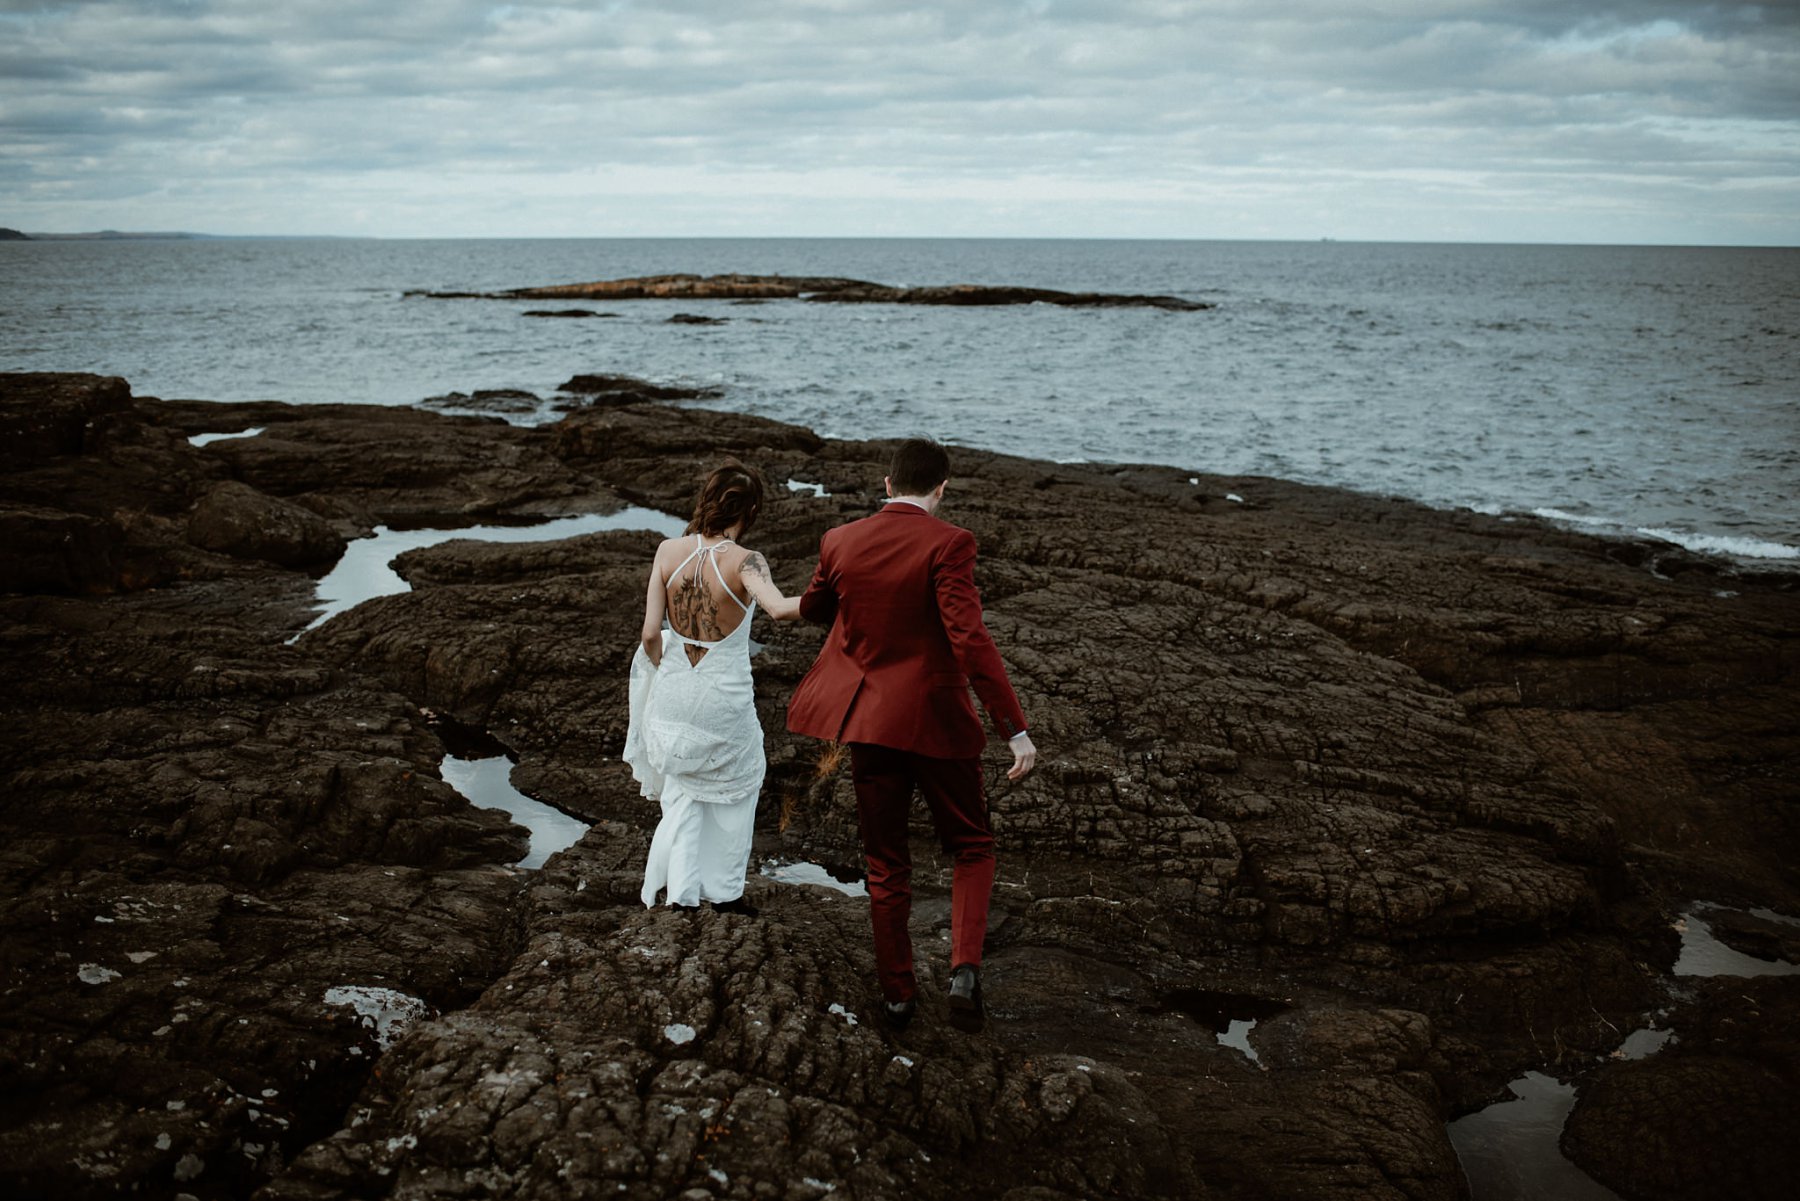 Bride and groom at the black rocks on Preque Isle in Marquette.